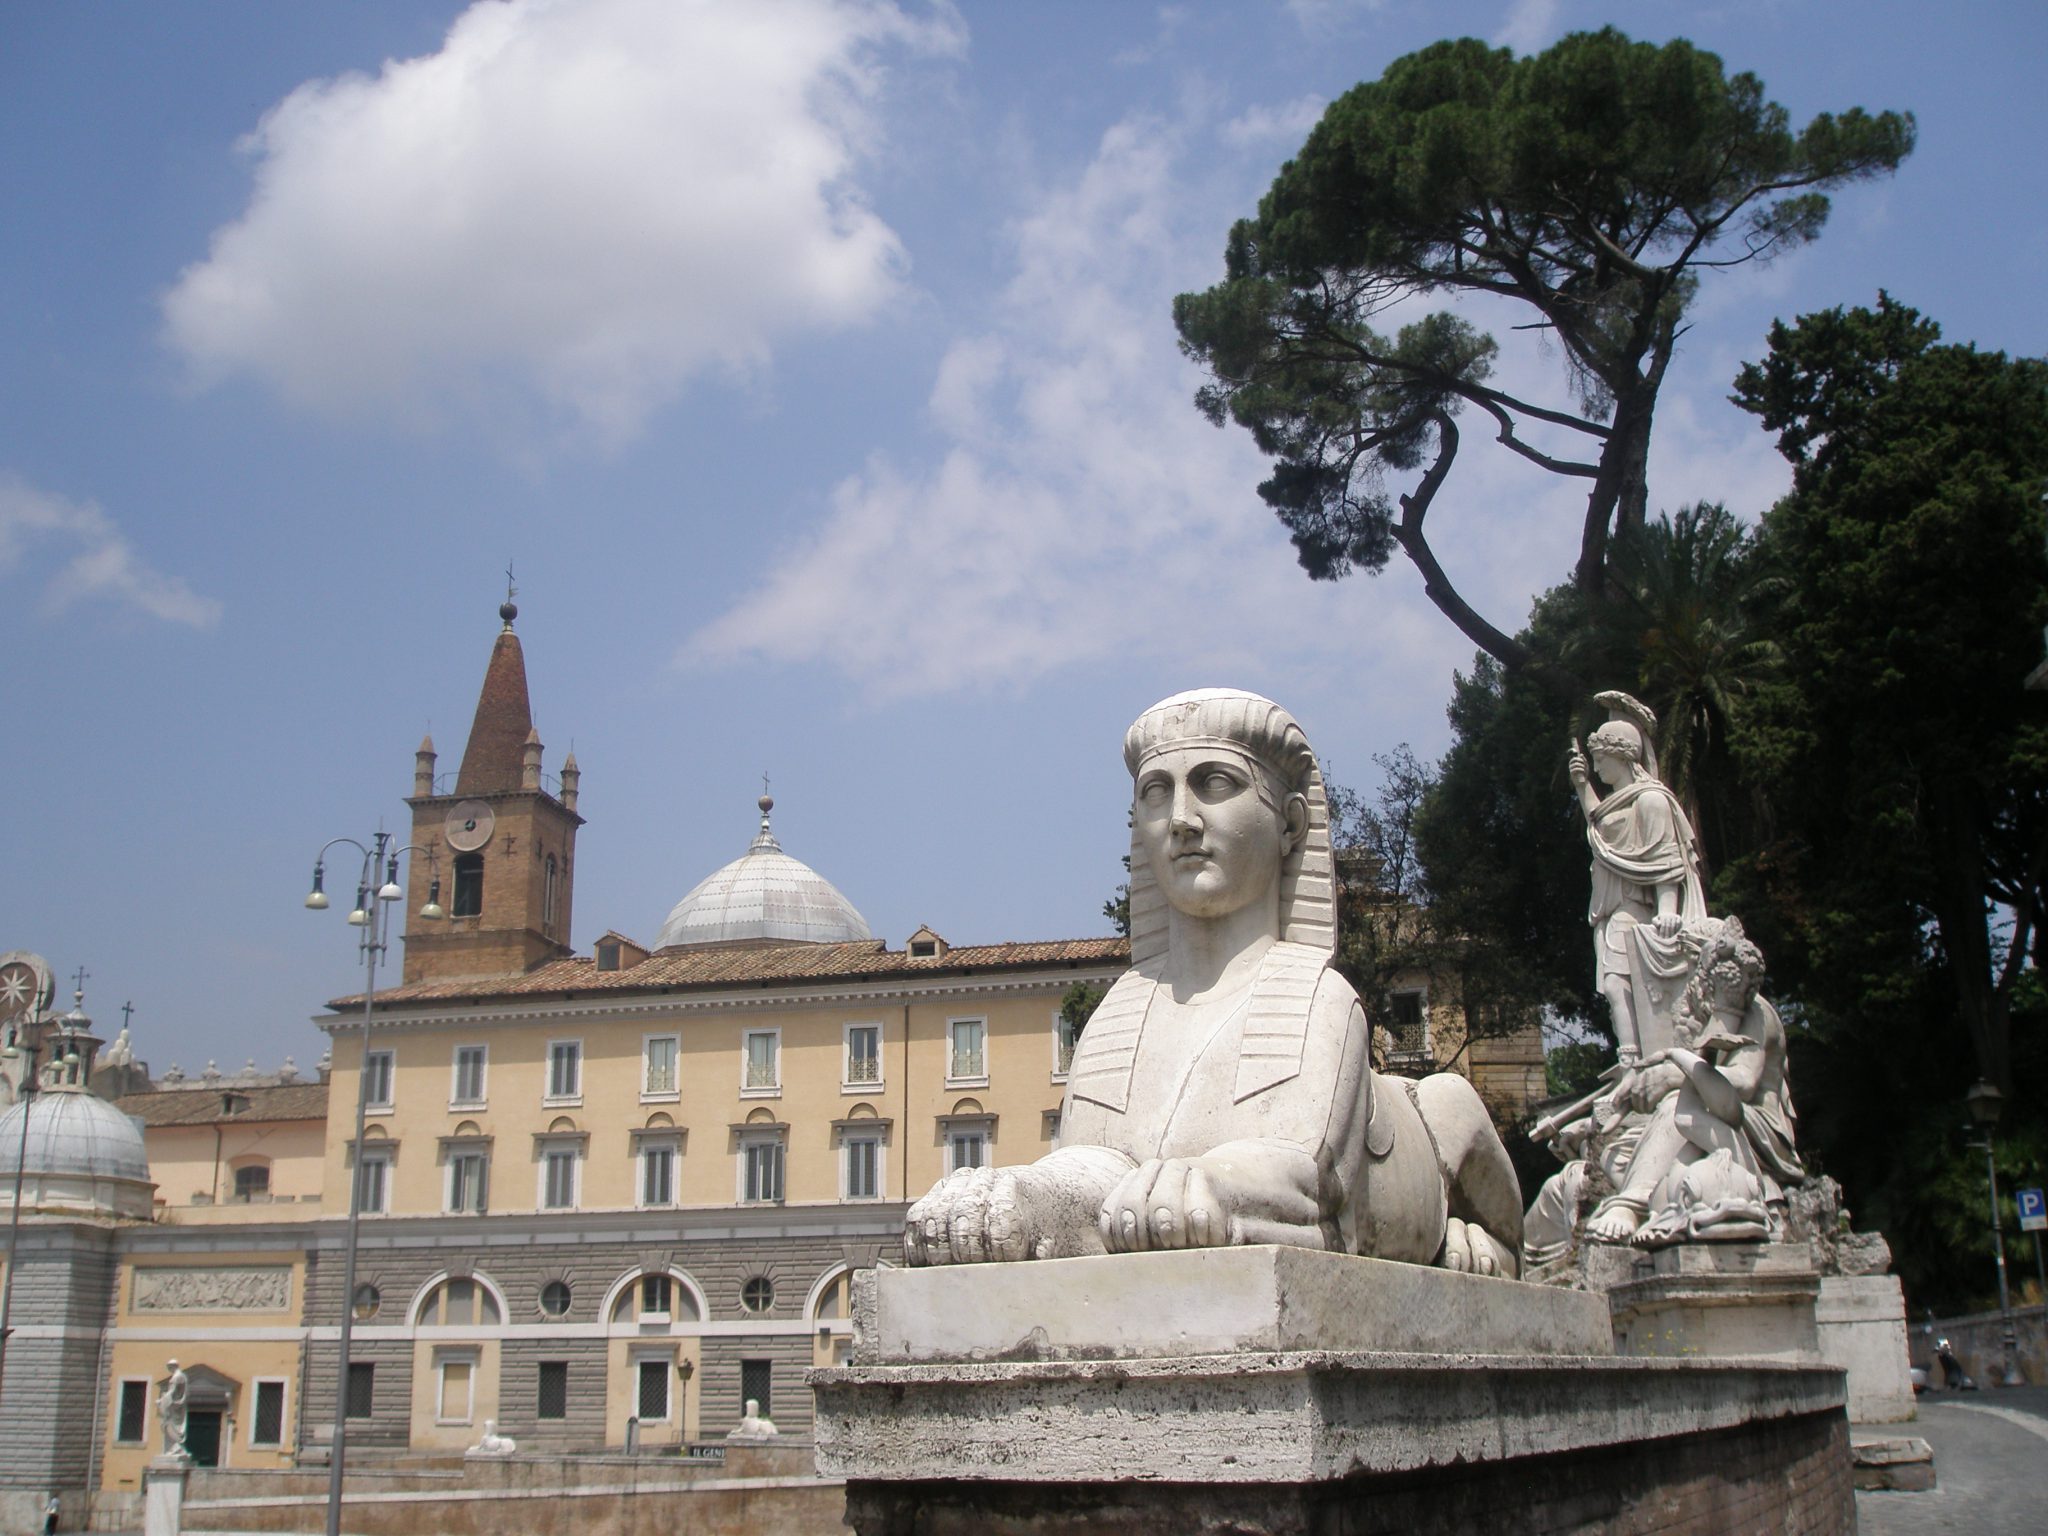 A sphinx guards the winding road that leads from the Pincian Hill and the gardens of Villa Borghese down to Piazza del Popolo.